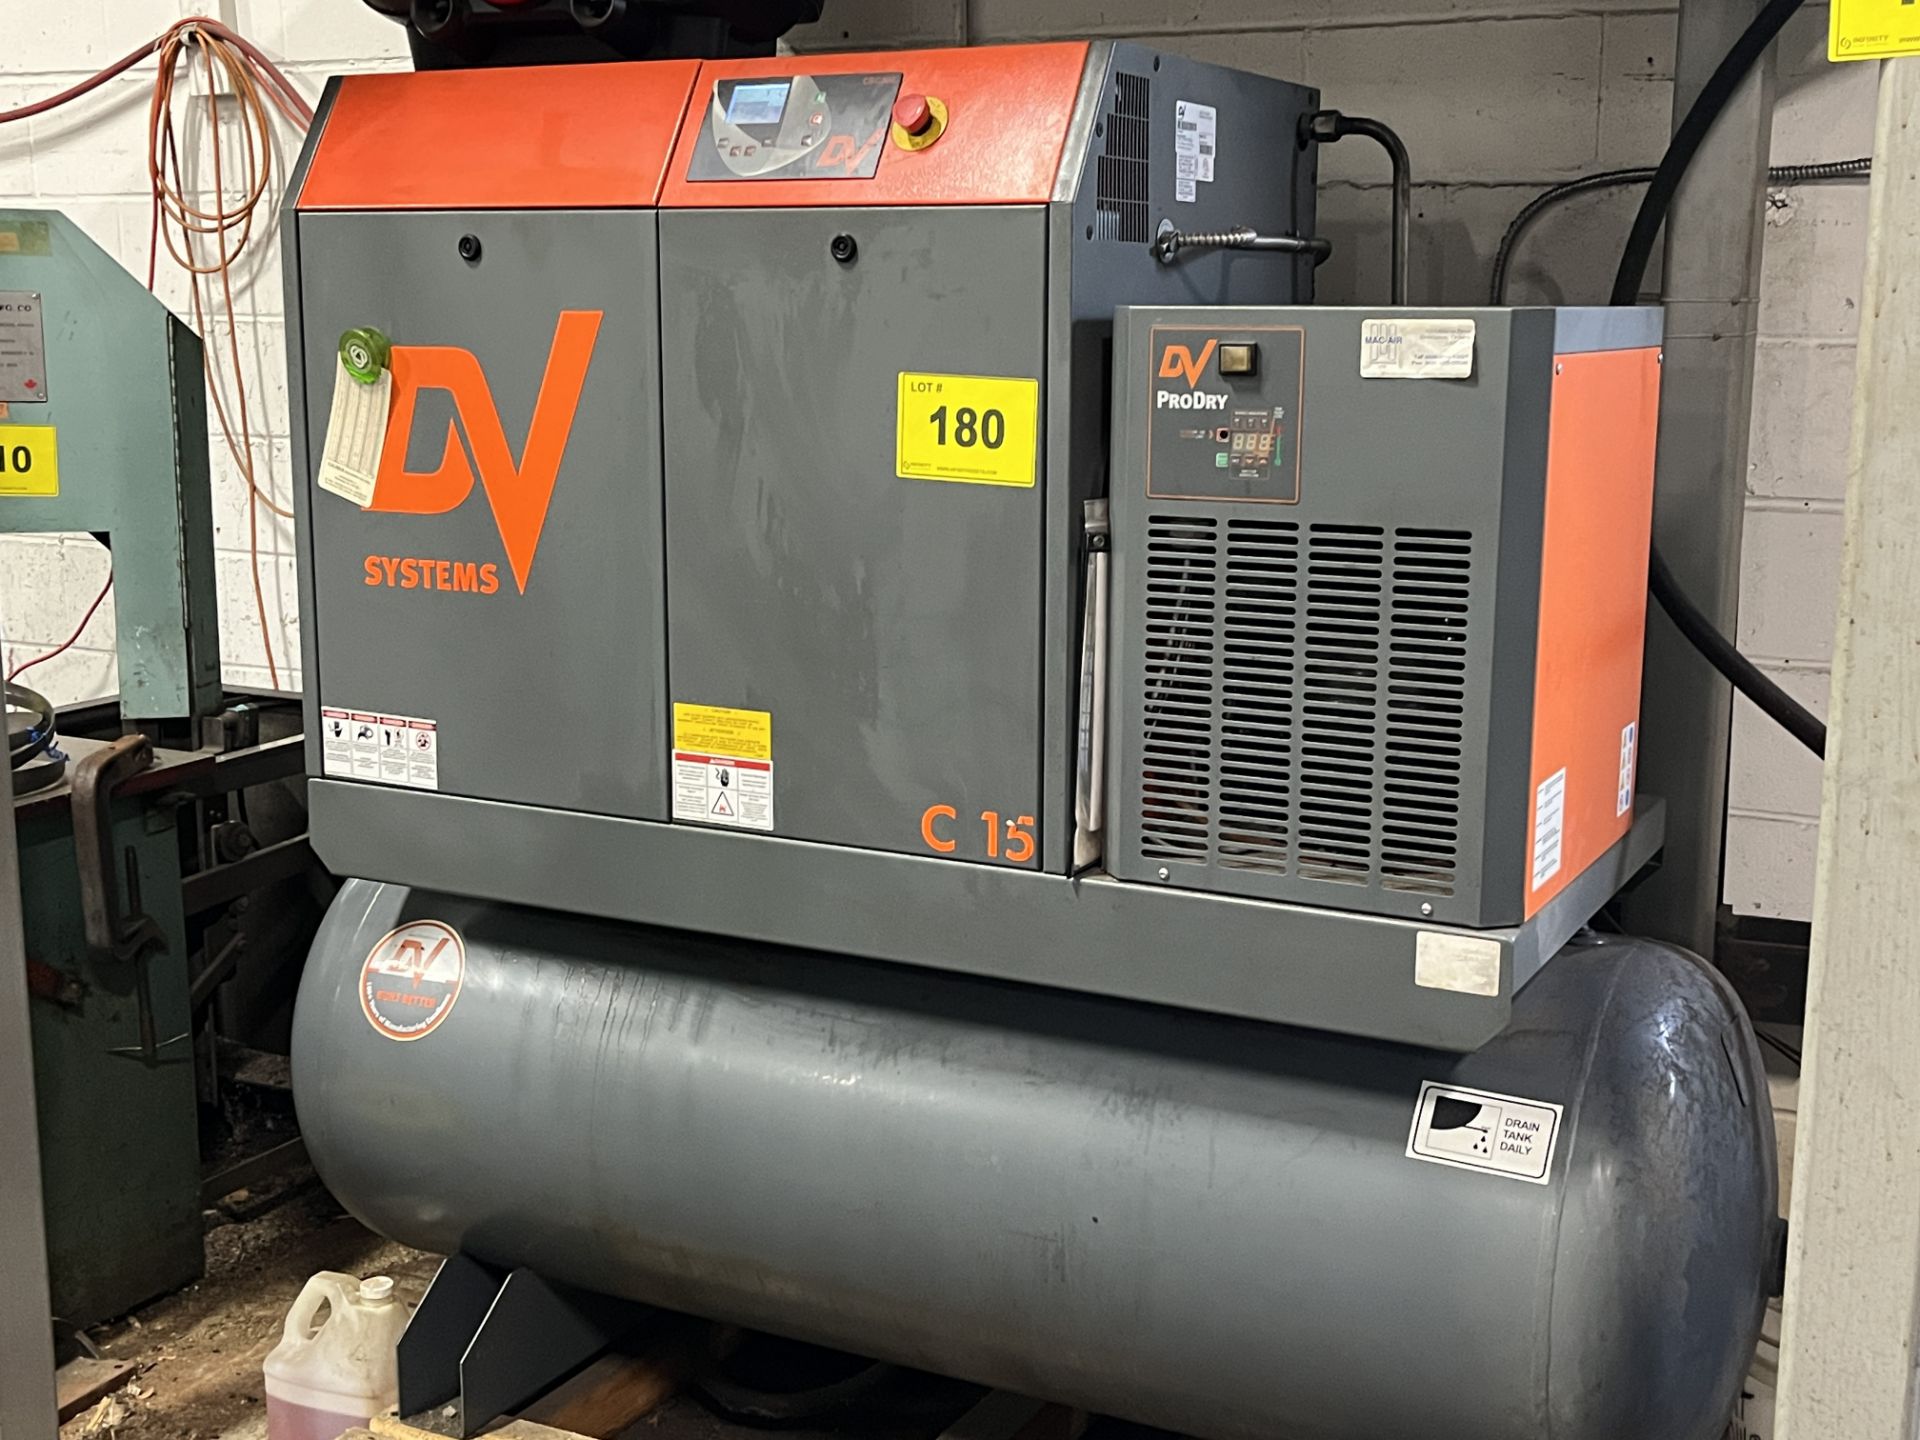 DV SYSTEMS C15TD AIR COMPRESSOR, 15HP, PRODUCT NUMBER S-002433, S/N 082733 W/ ASD60 AIR DRYER ( - Image 5 of 5